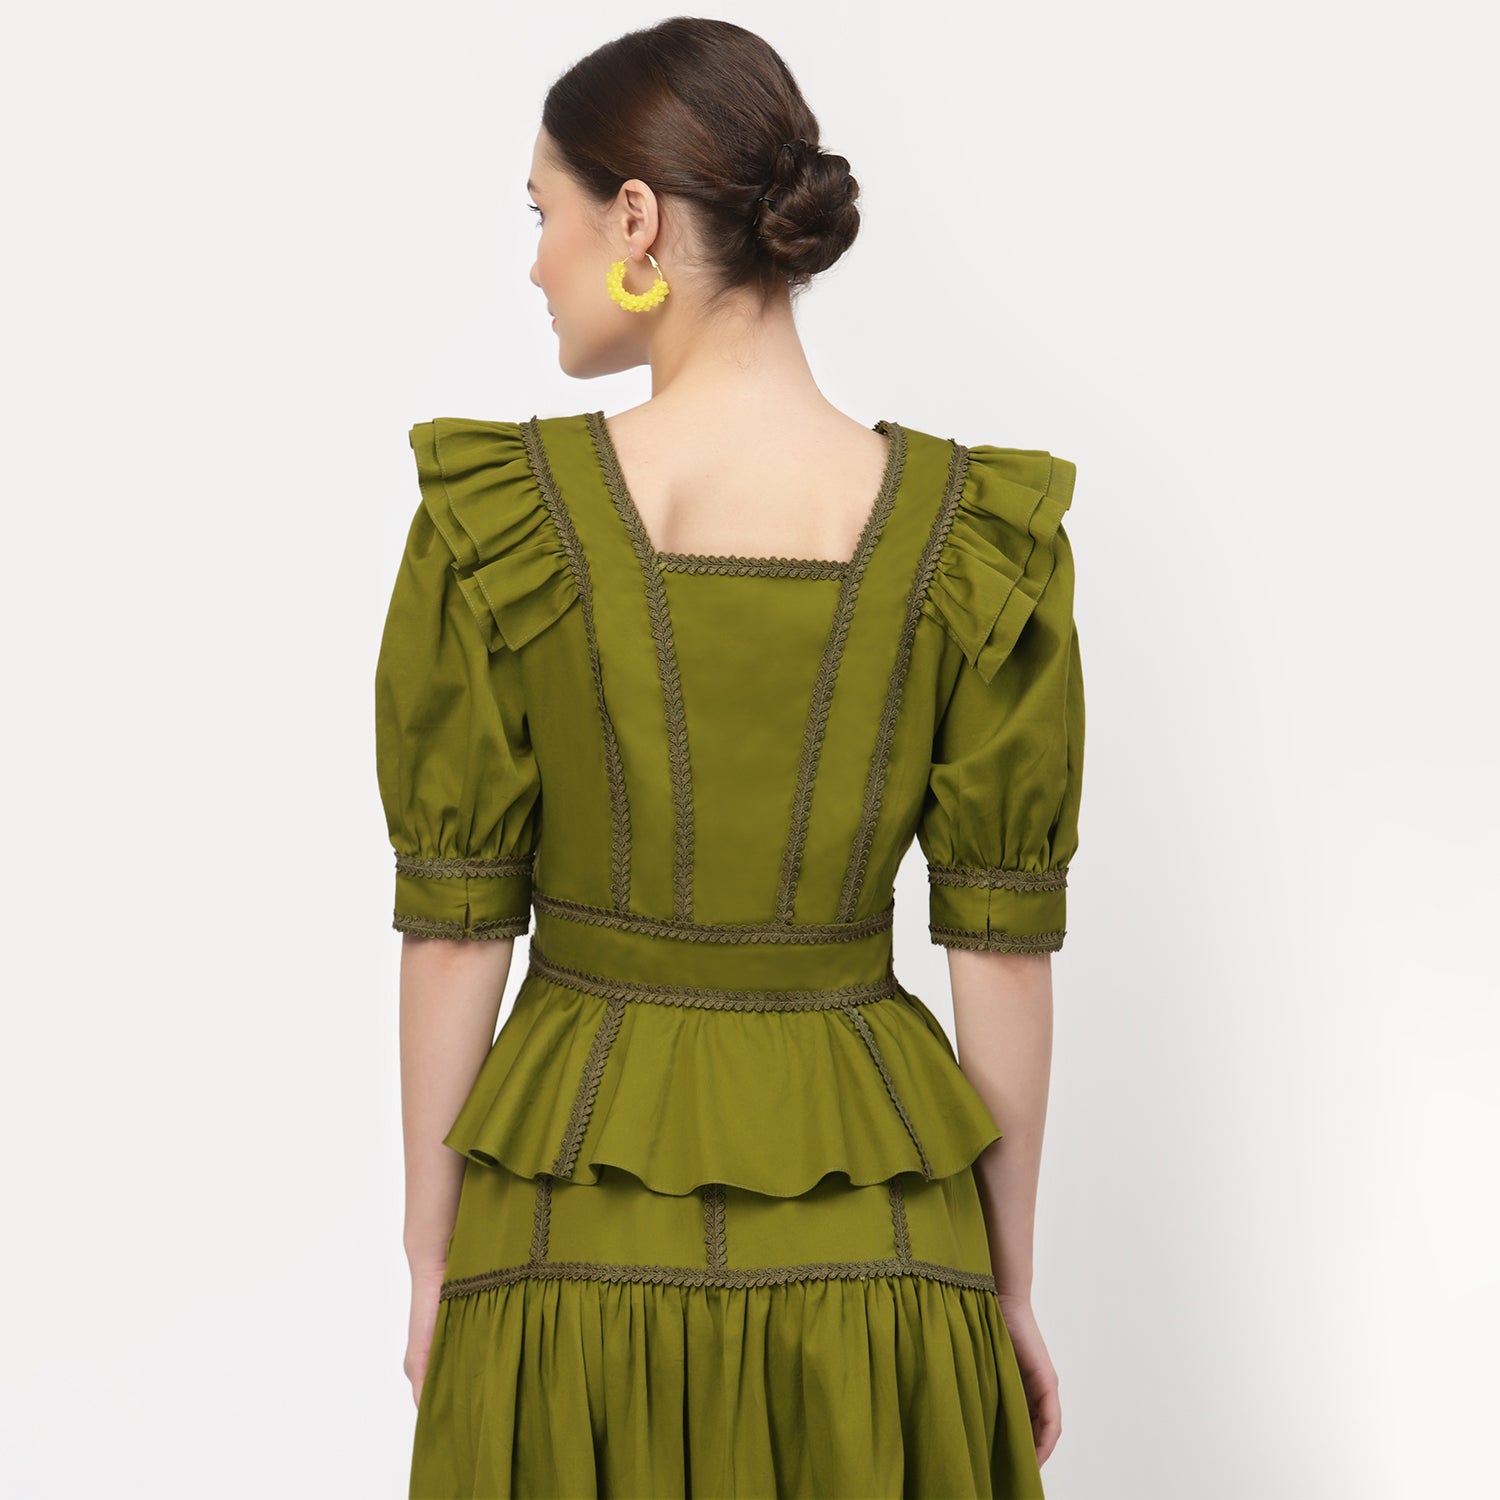 Olive Peplum Top With Laces